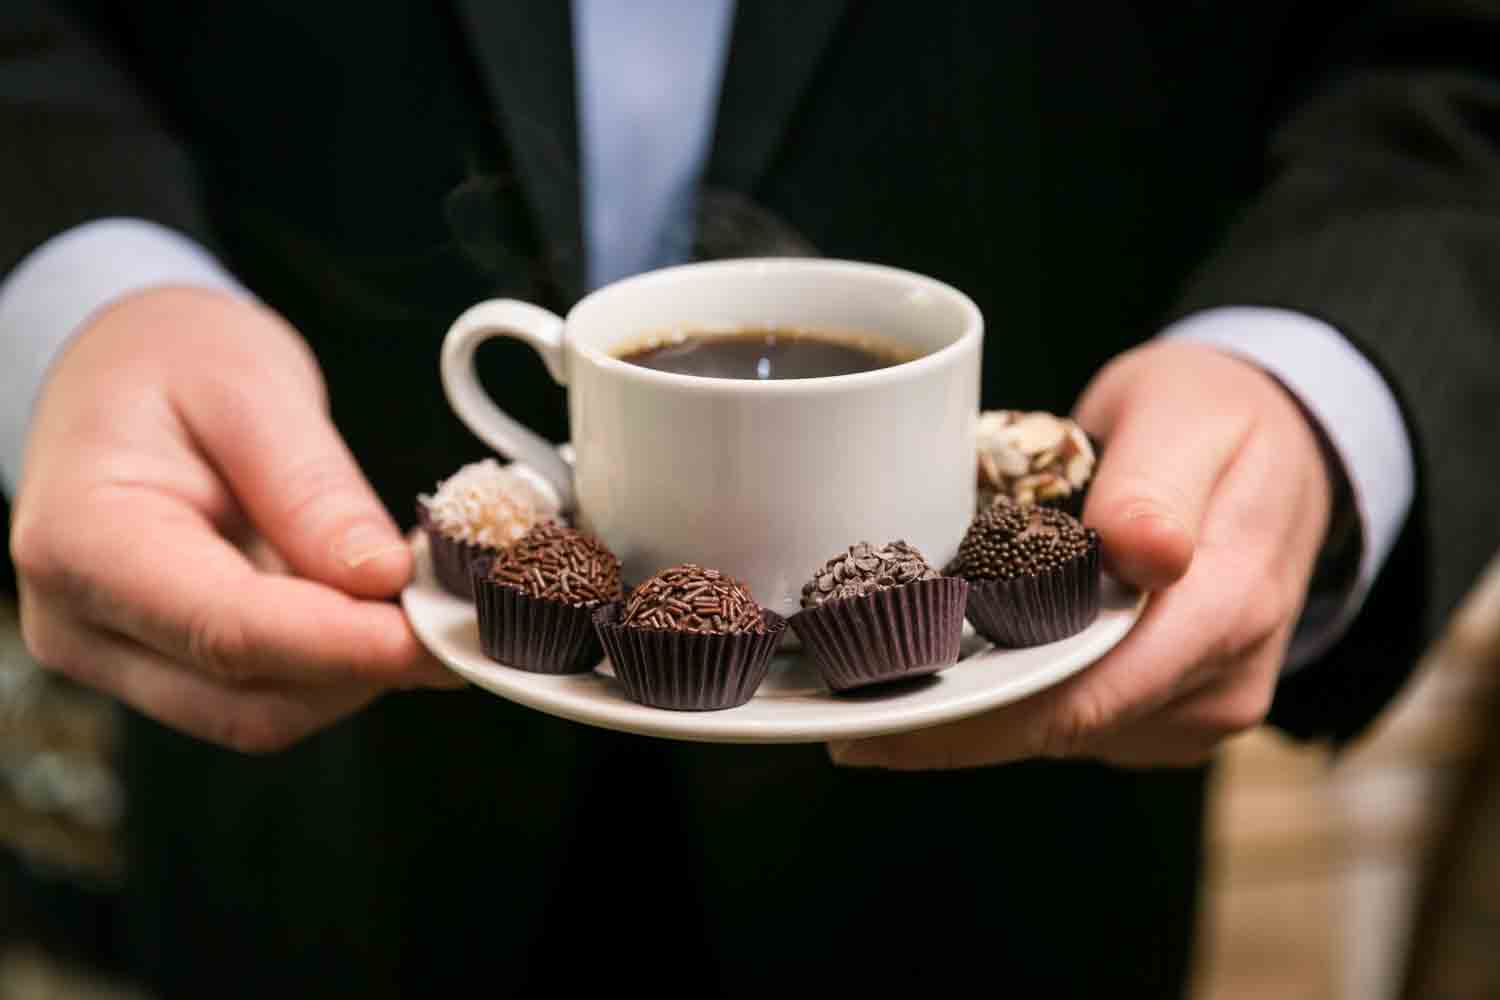 Close up on hands holding coffee cup with brigadeiro candies around the cup